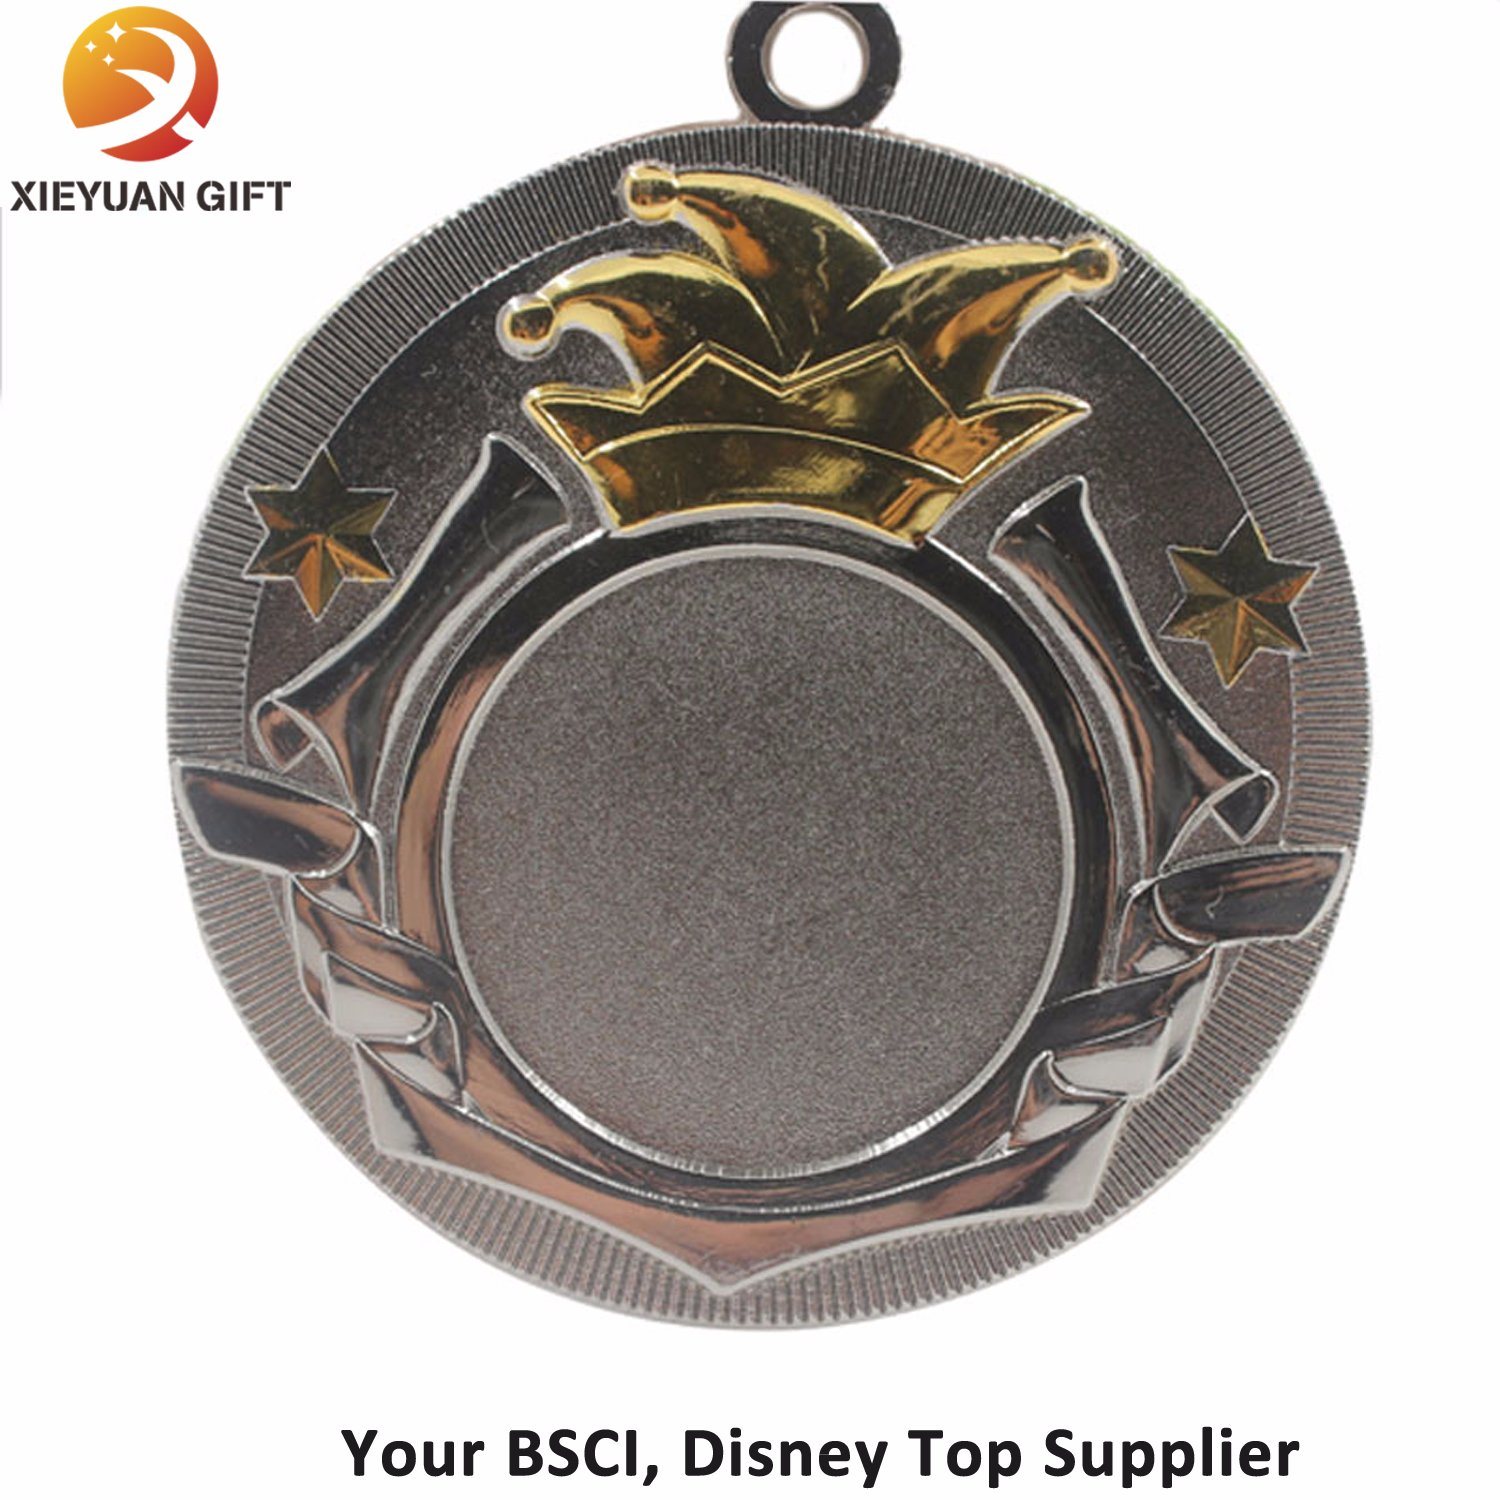 Promotion Gift Custom Round Shape Medal Plated Silver and Gold